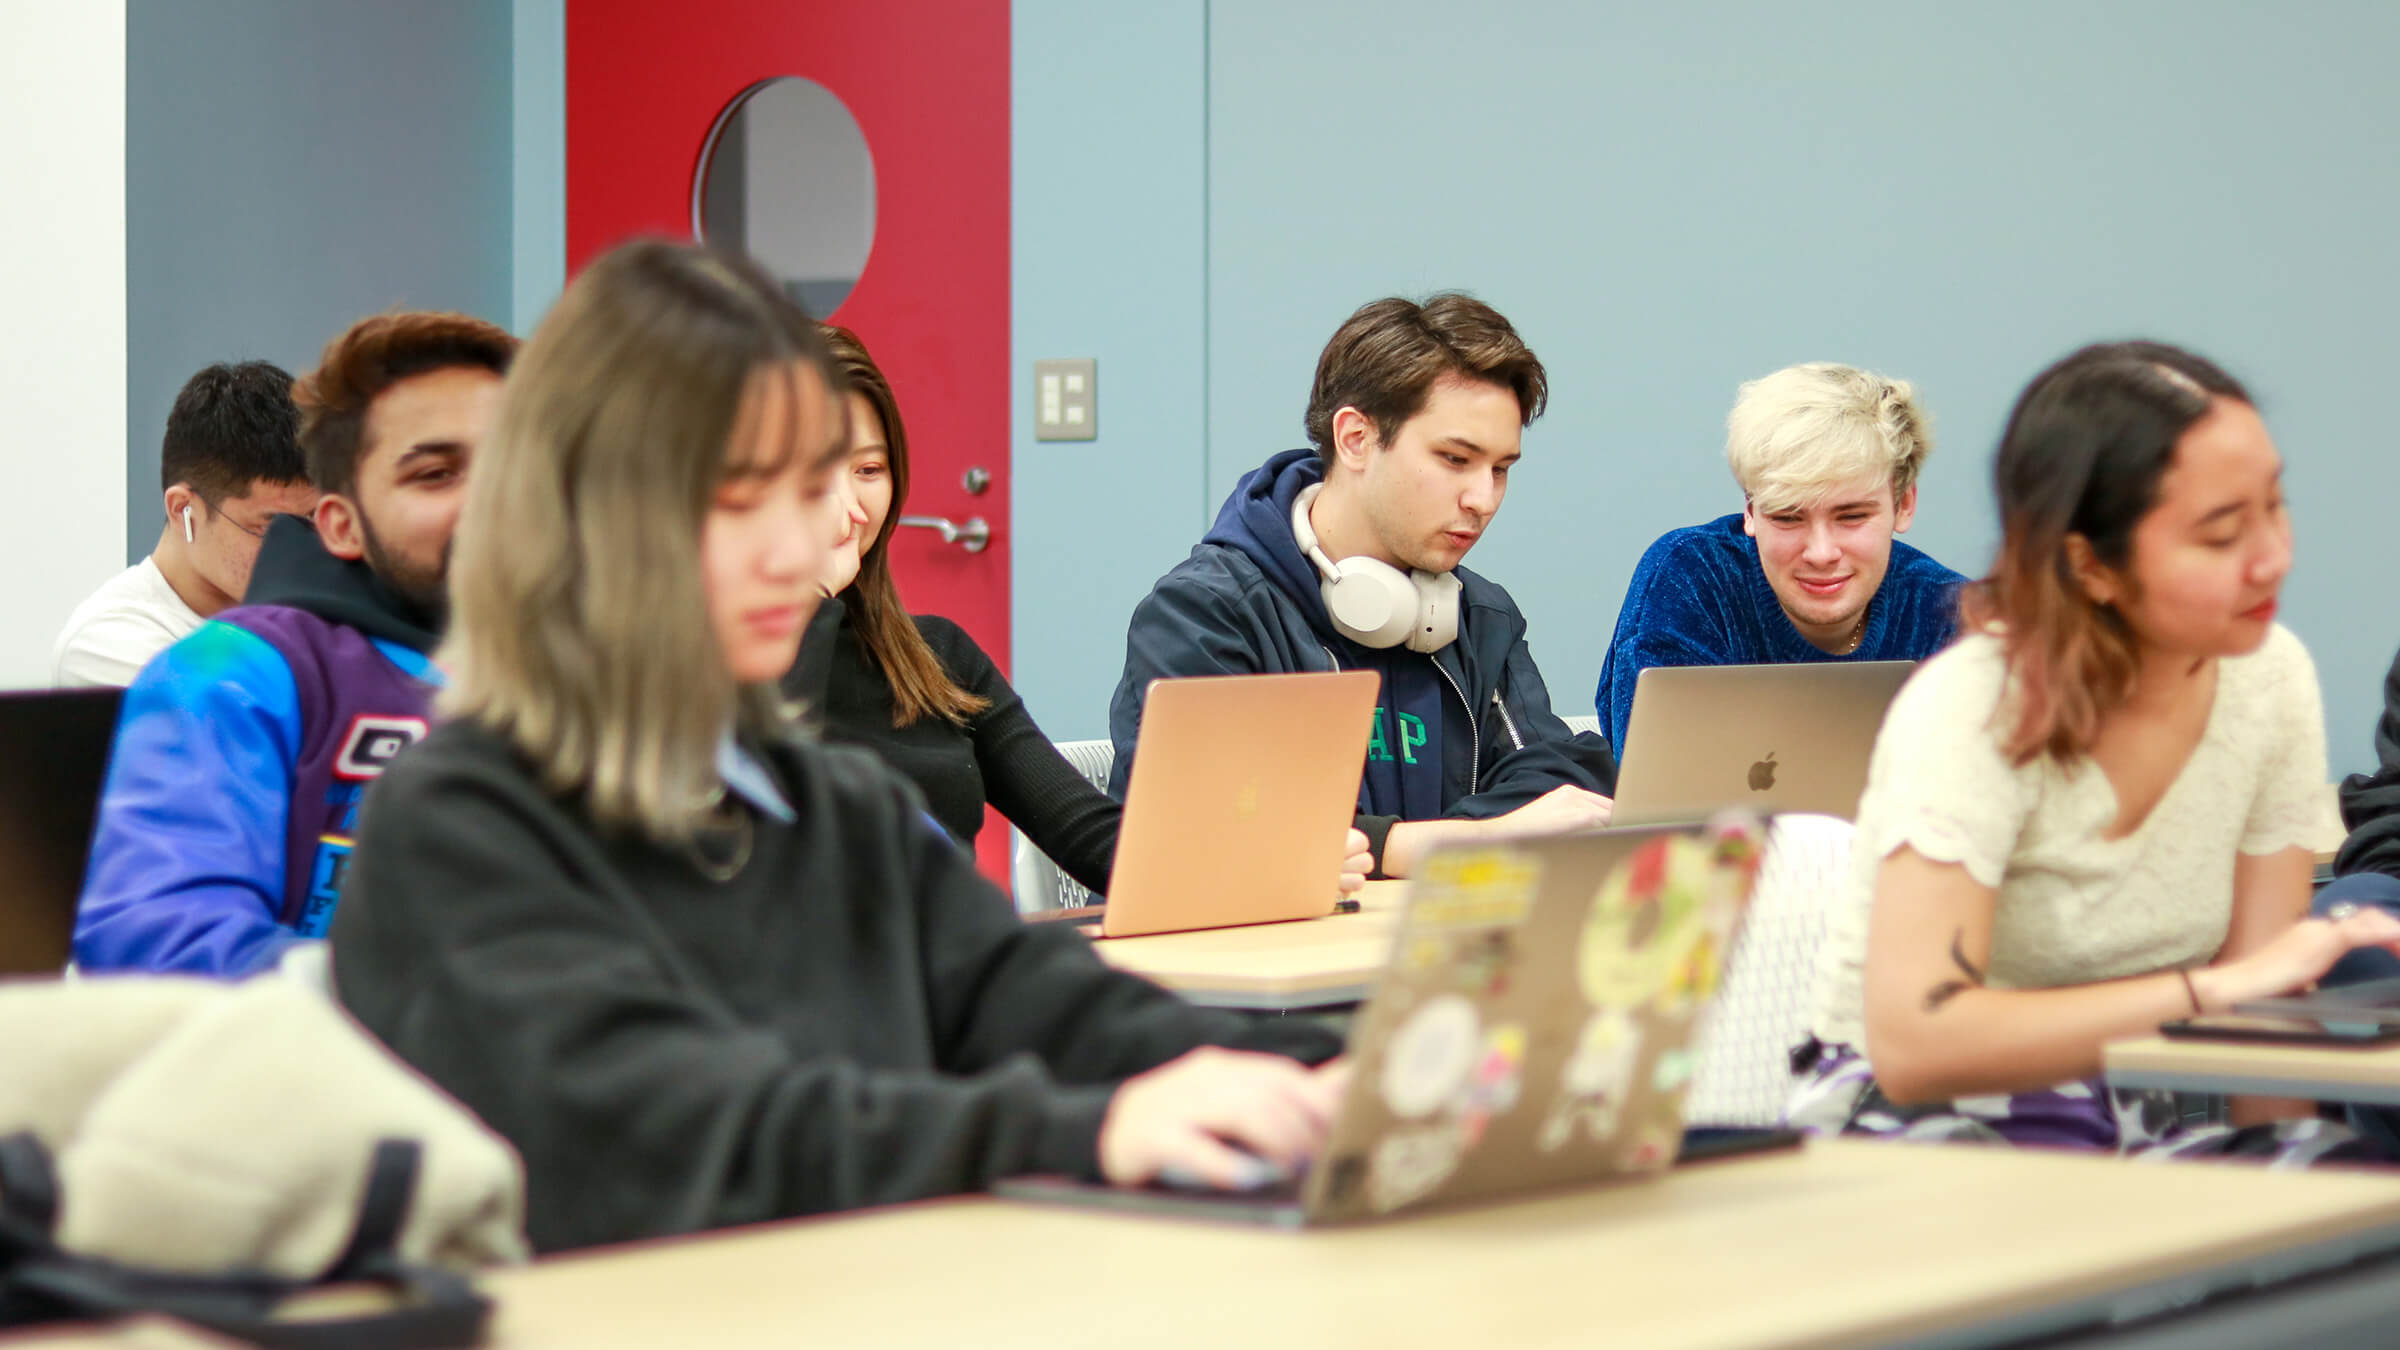 Students studying together in a class on TUJ campus.